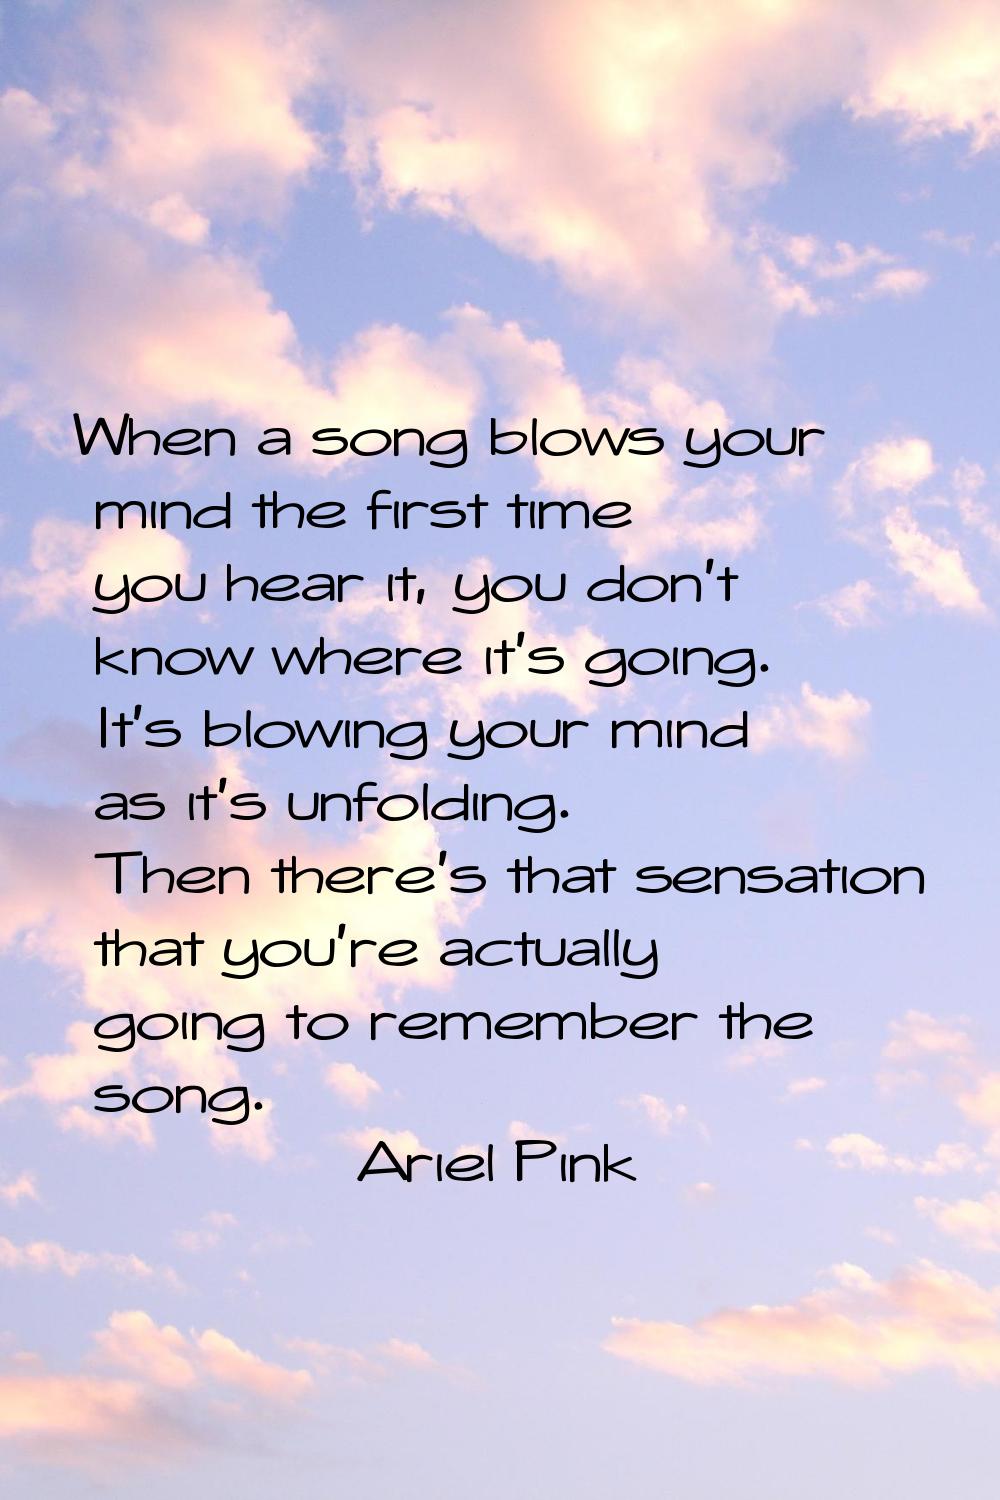 When a song blows your mind the first time you hear it, you don't know where it's going. It's blowi